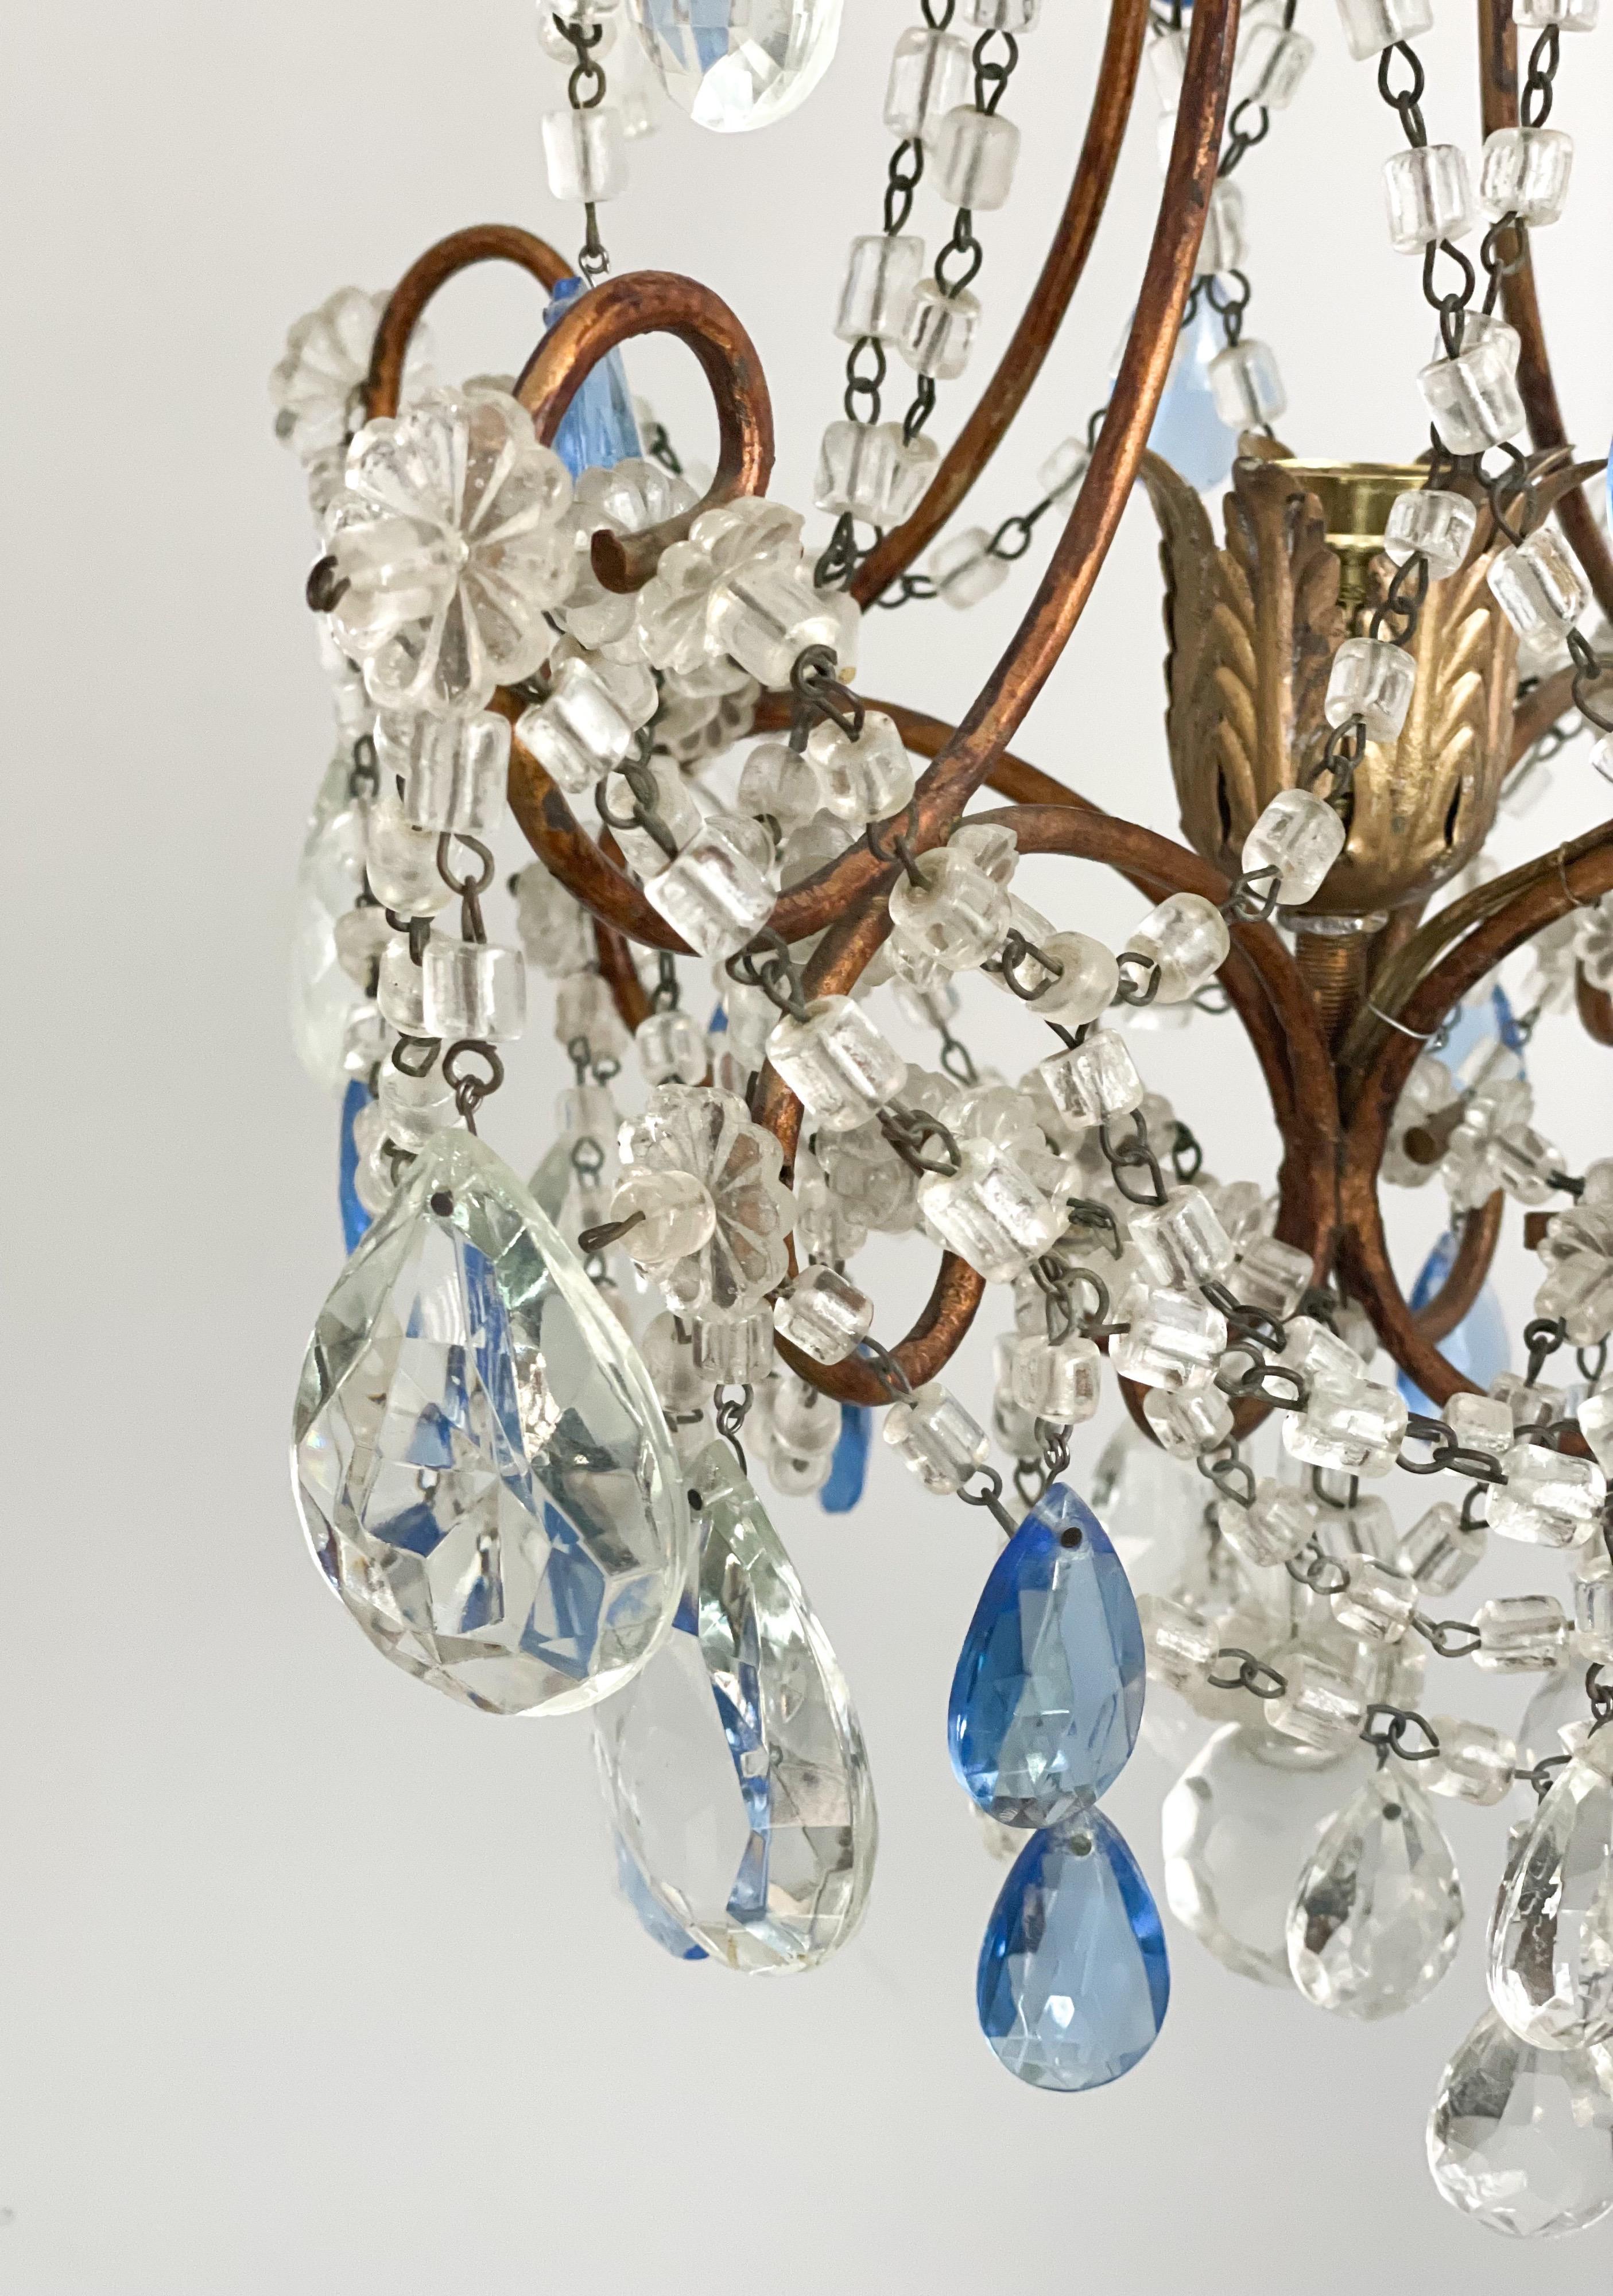 Mid-20th Century Italian Petite-Scale Beaded Chandelier with Blue Drops